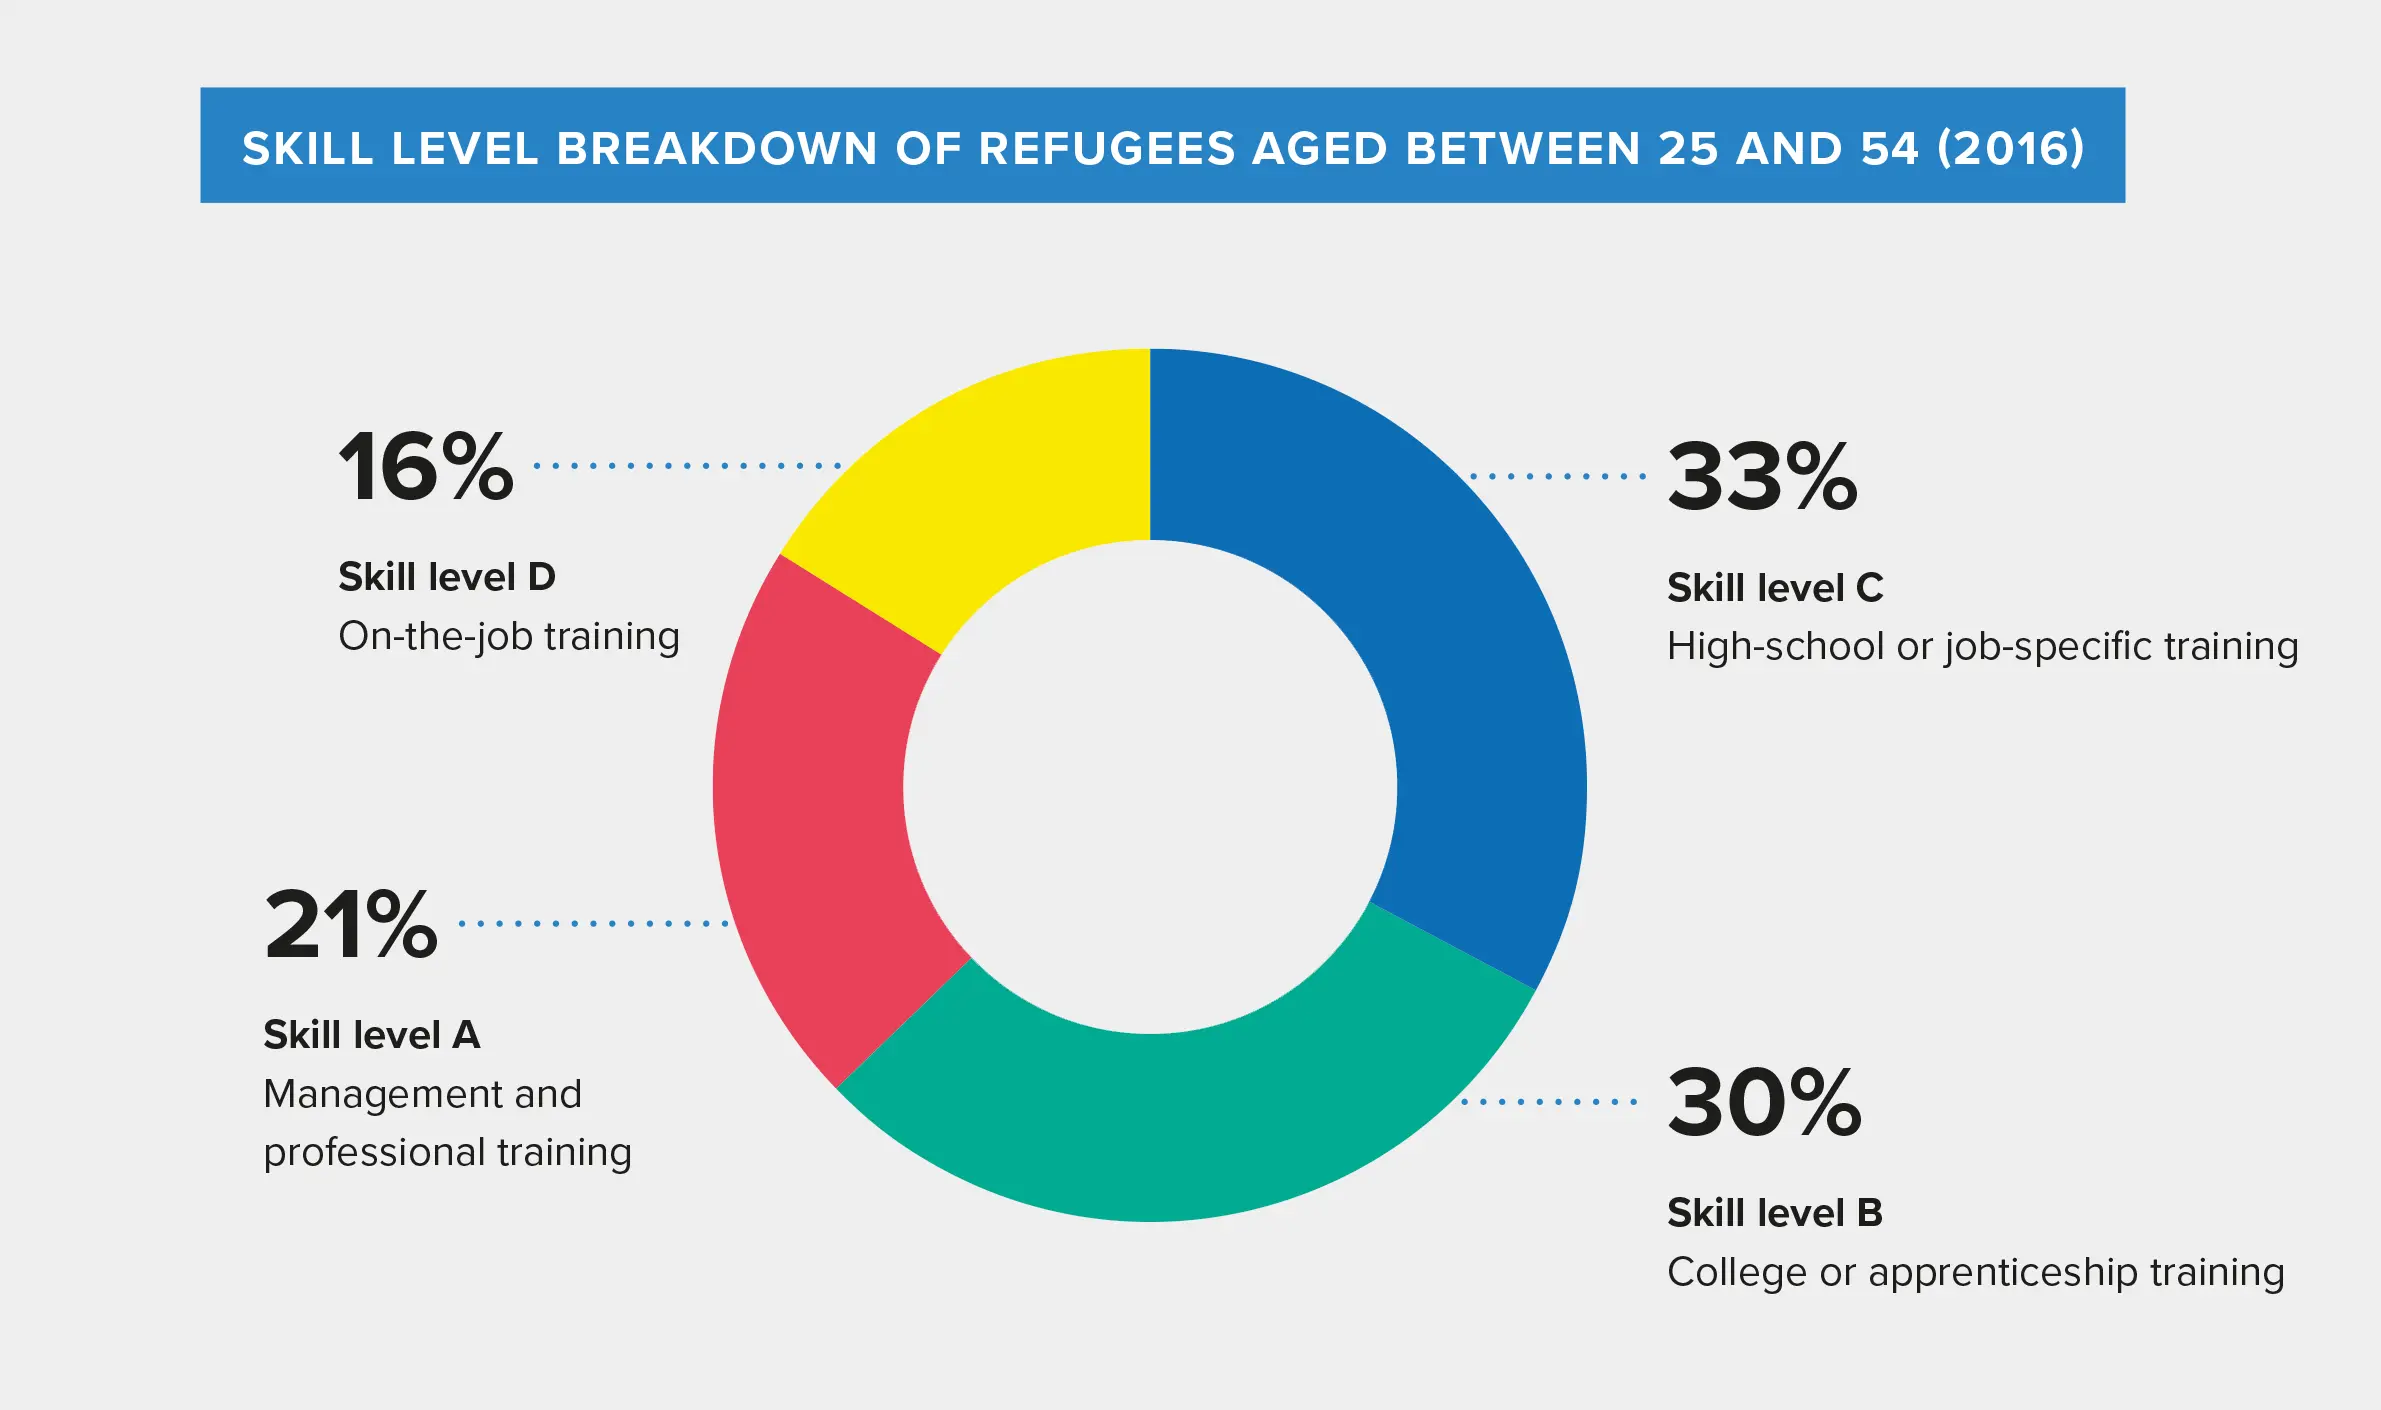 Graph showing skill level breakdown of refugees aged between 25 and 54 in 2016.